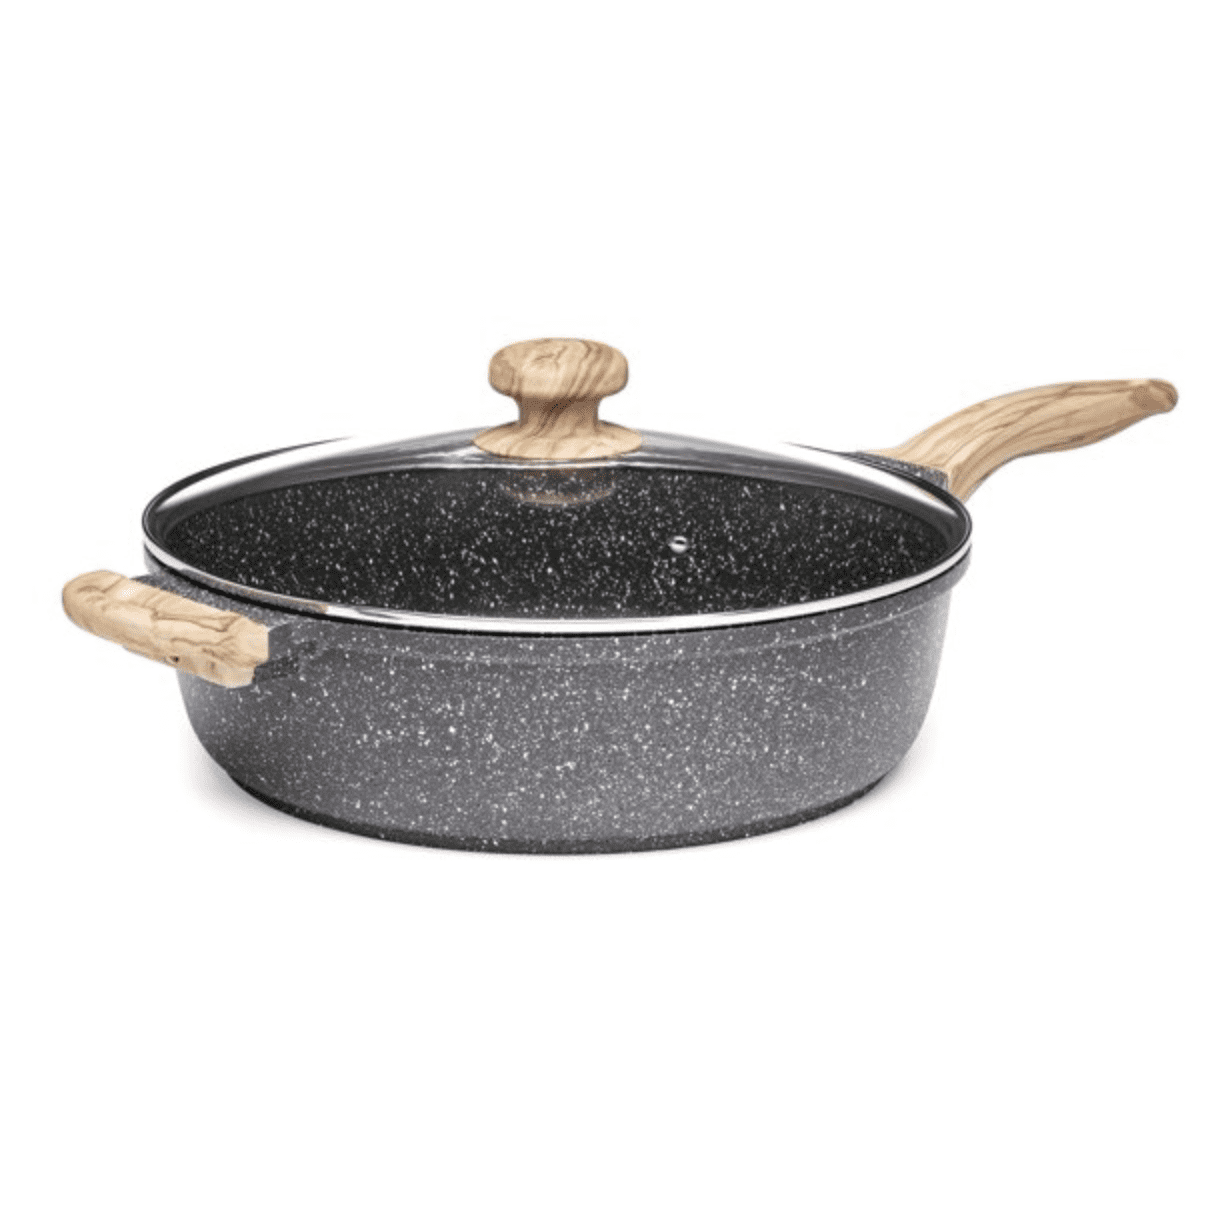 https://cdn.apartmenttherapy.info/image/upload/v1631636771/gen-workflow/product-database/The_Pioneer_Woman_Prairie_Signature_6_Quart_Cast_Aluminum_Jumbo_Saute%CC%81_Pan_Charcoal_Speckle.png